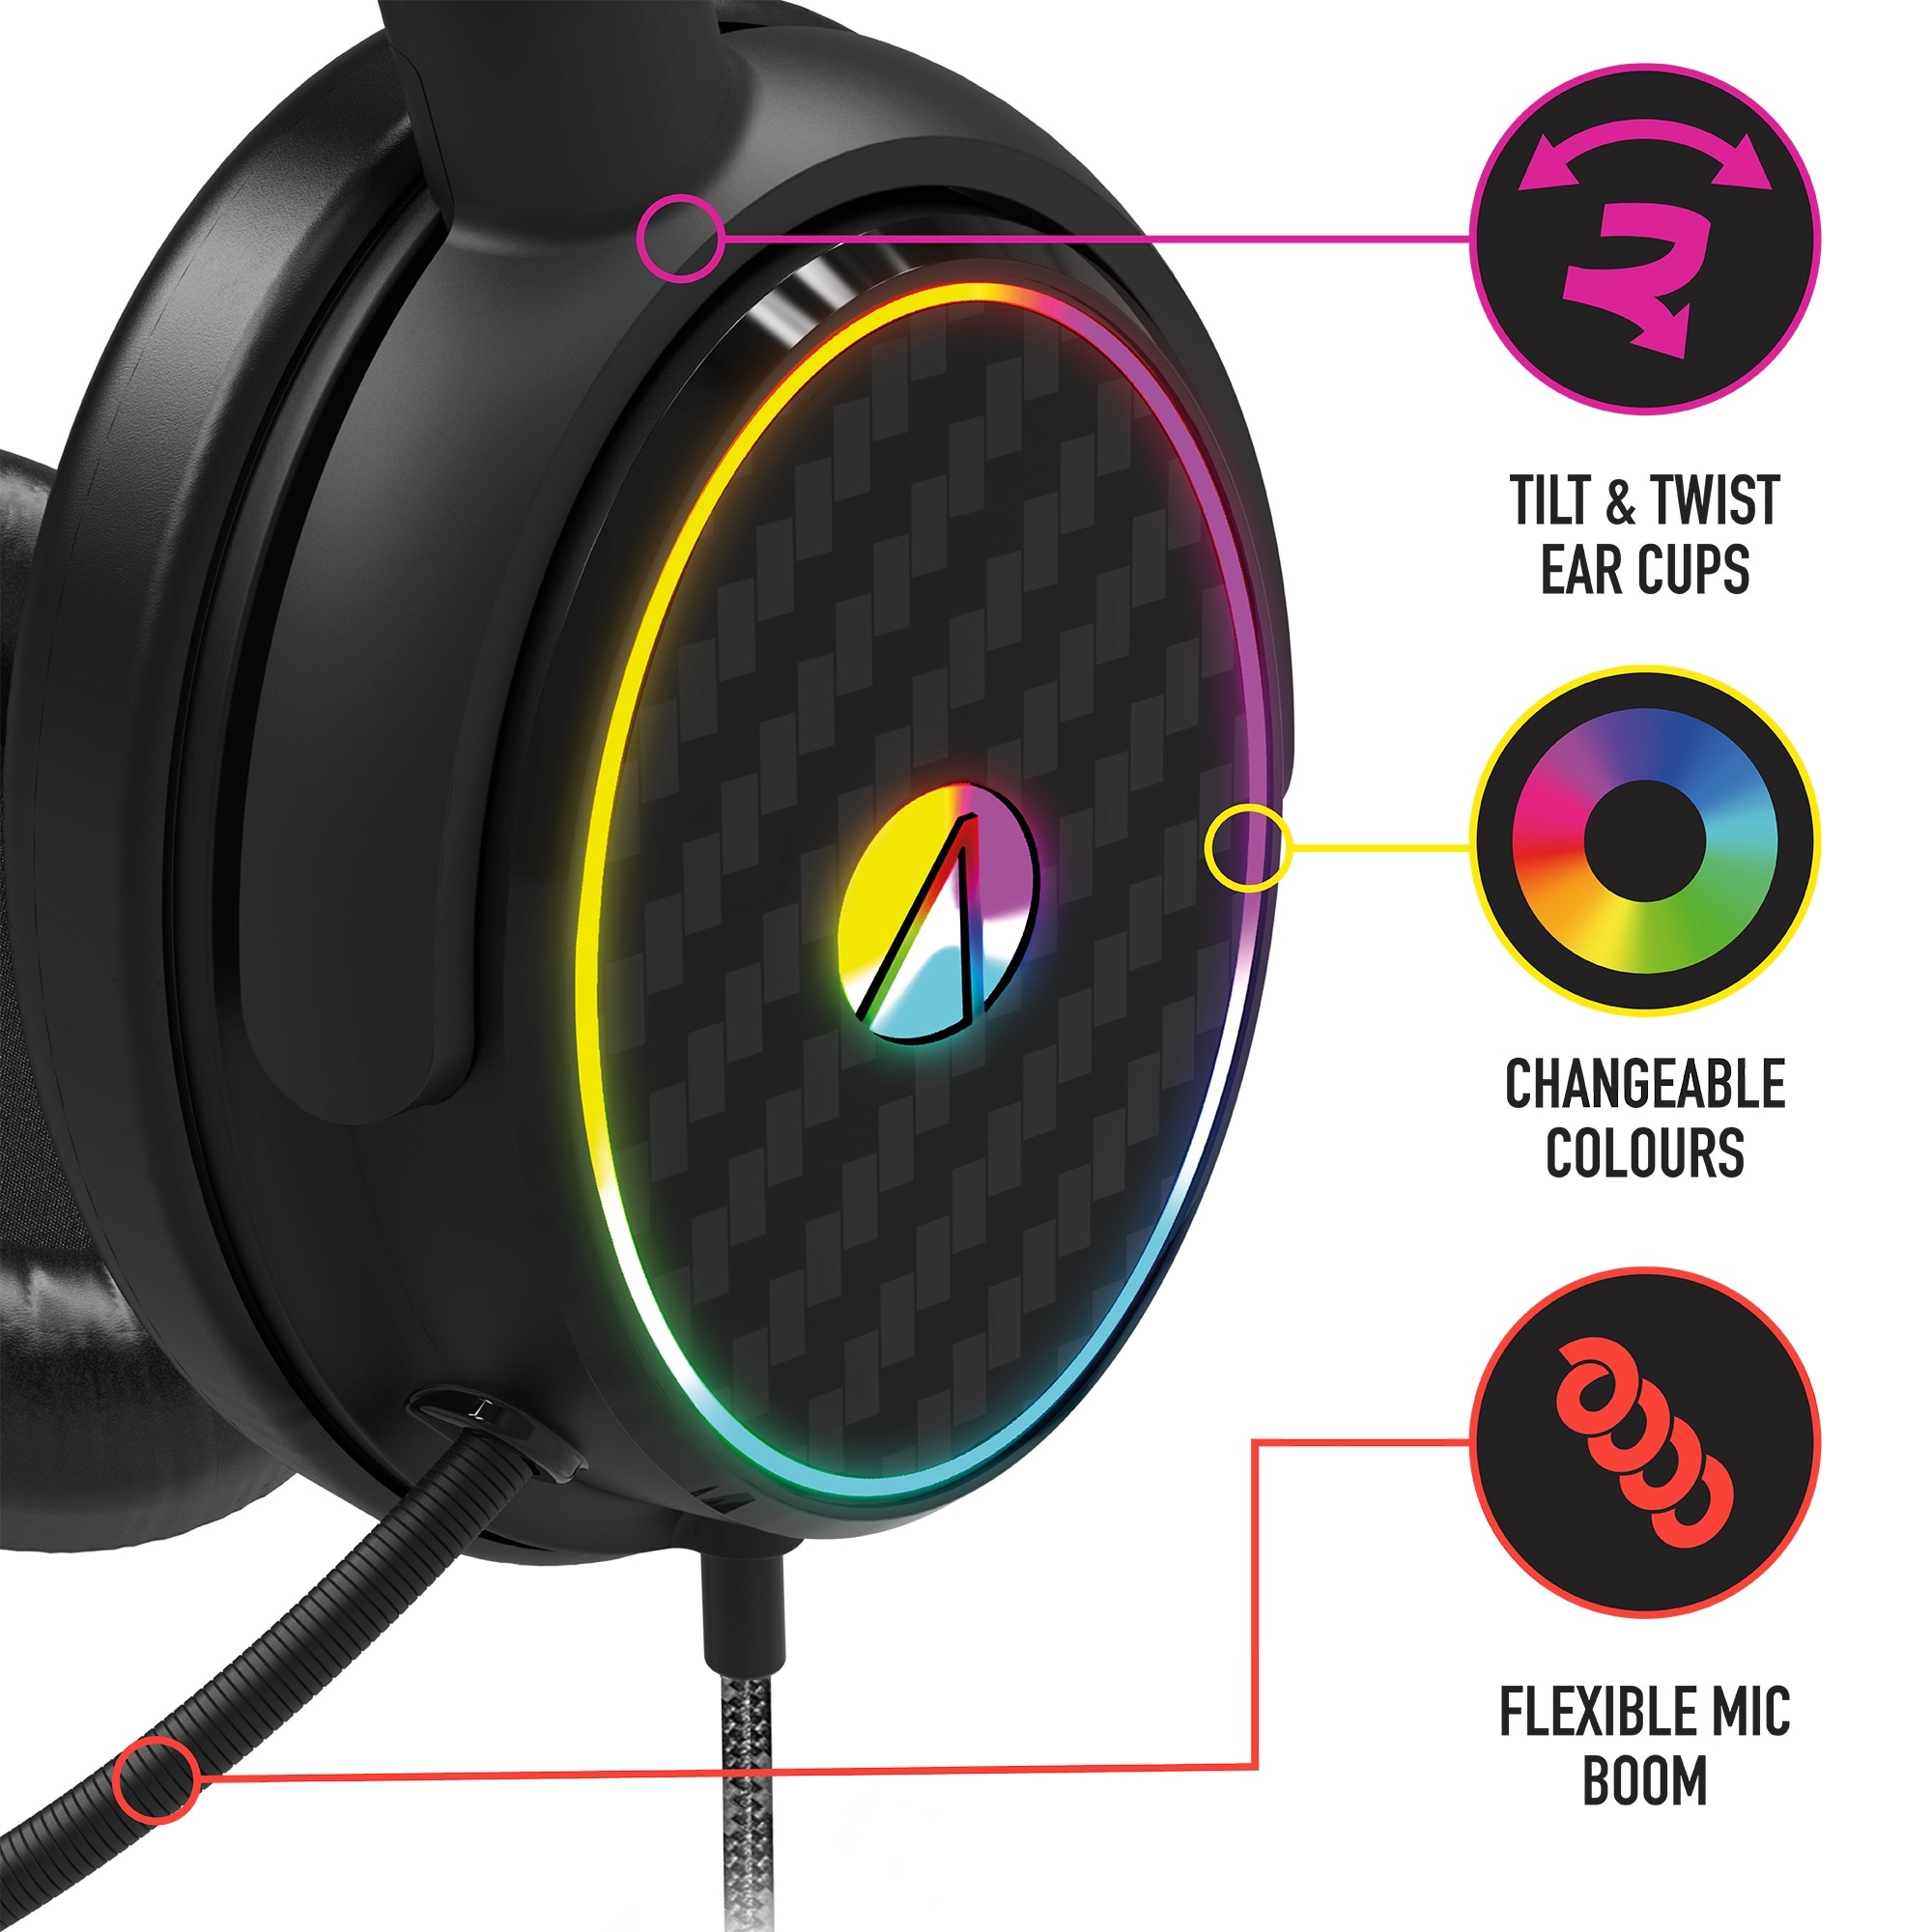 Stealth Gaming-Headset »Stereo Gaming Headset C6-100 mit LED Beleuchtung«, Plastikfreie Verpackung